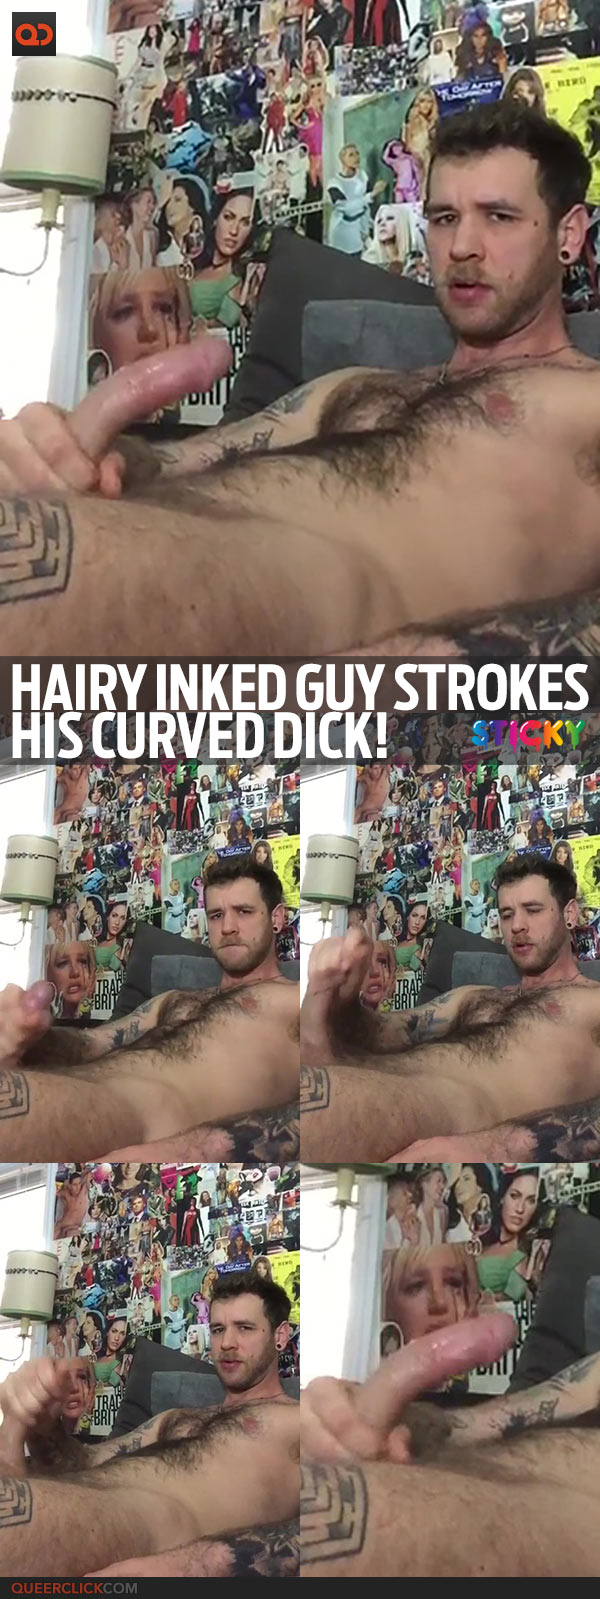 Hairy Inked Guy Strokes His Curved Dick!